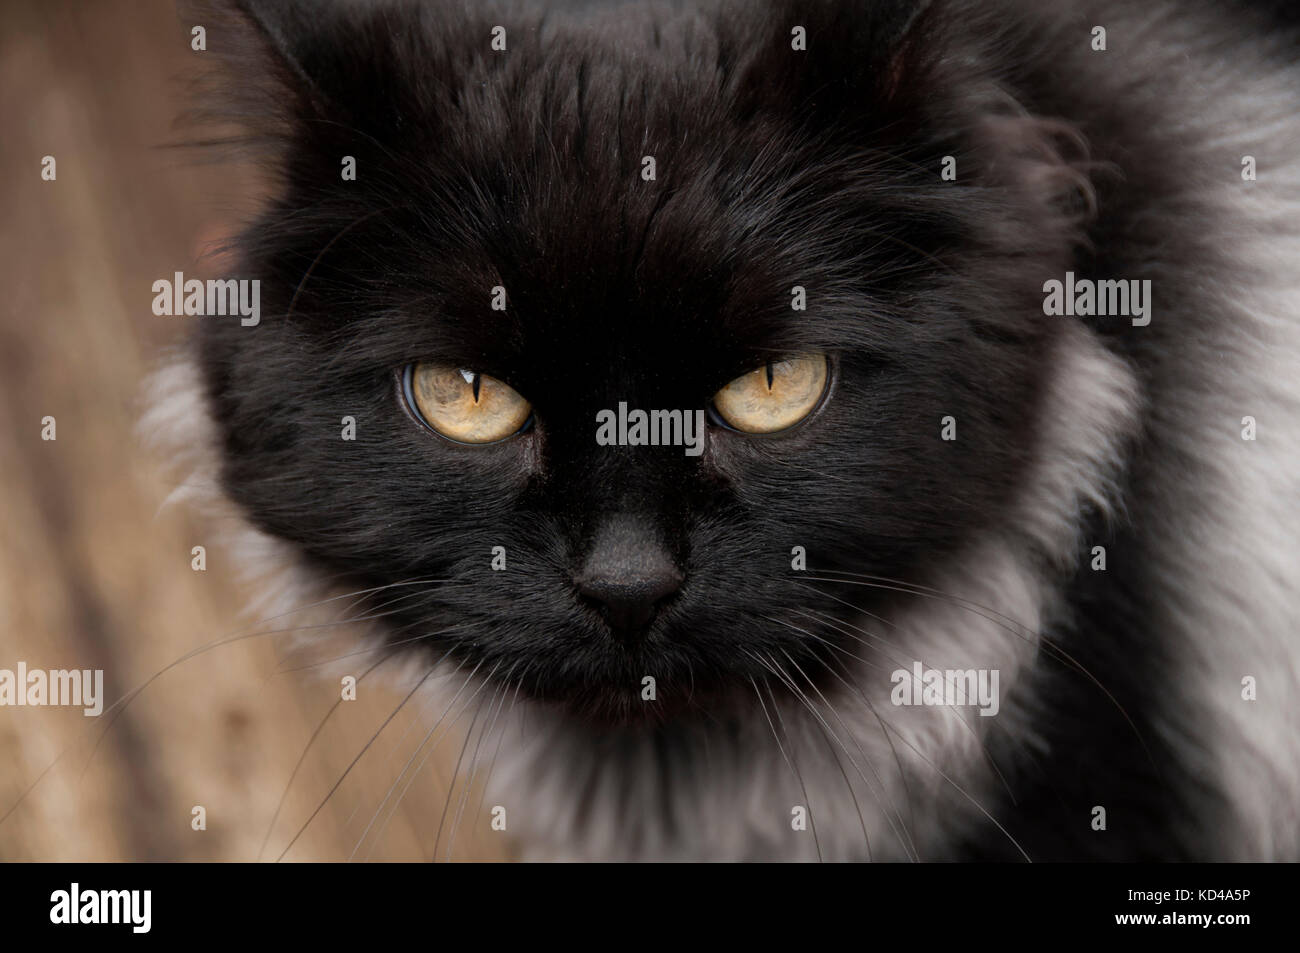 Black cat with golden eyes staring. Stock Photo